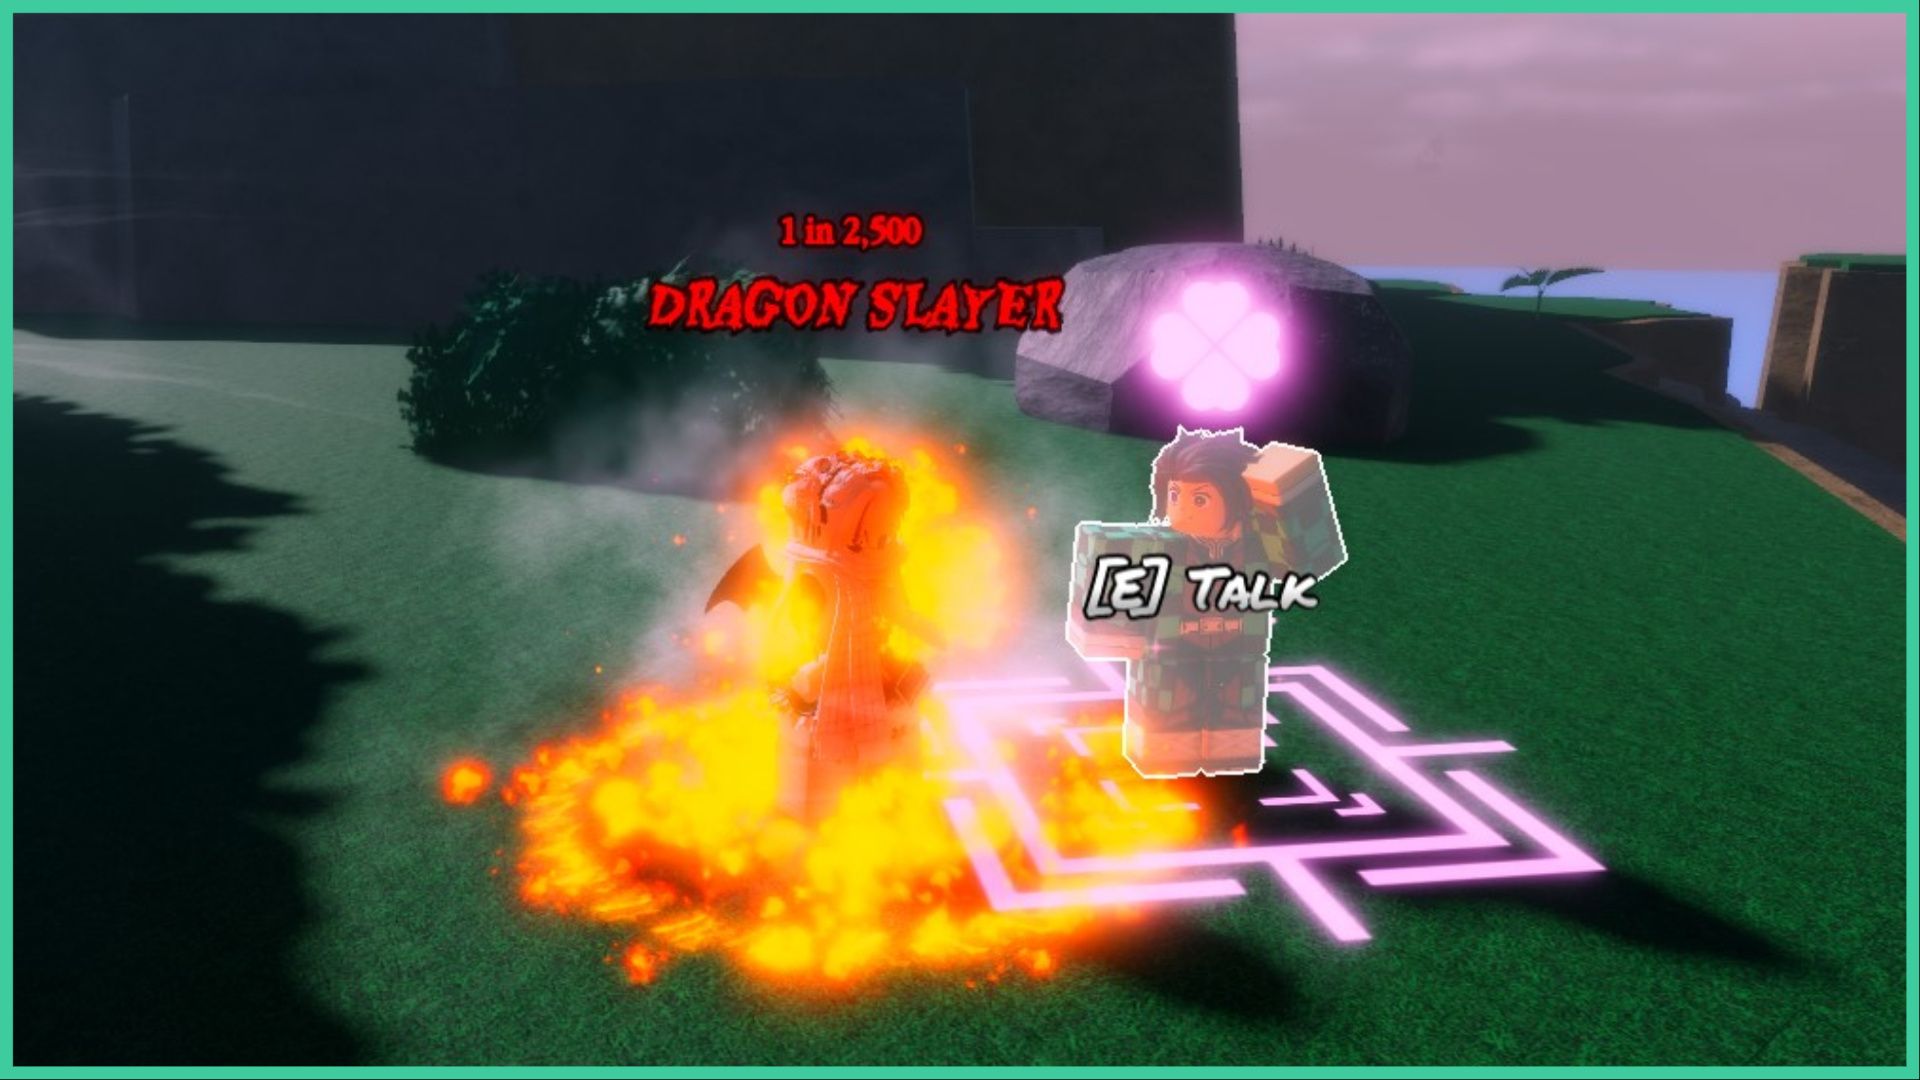 feature image for our anime roulette dragon ball guide, it's a screenshot of a roblox player with flames around them while wearing a scarf and the 'dragon slayer' title above them as they stand on a hill next to an NPC who looks like Tanjiro from Demon Slayer with pink lines under his feet and a pink clover symbol above his head